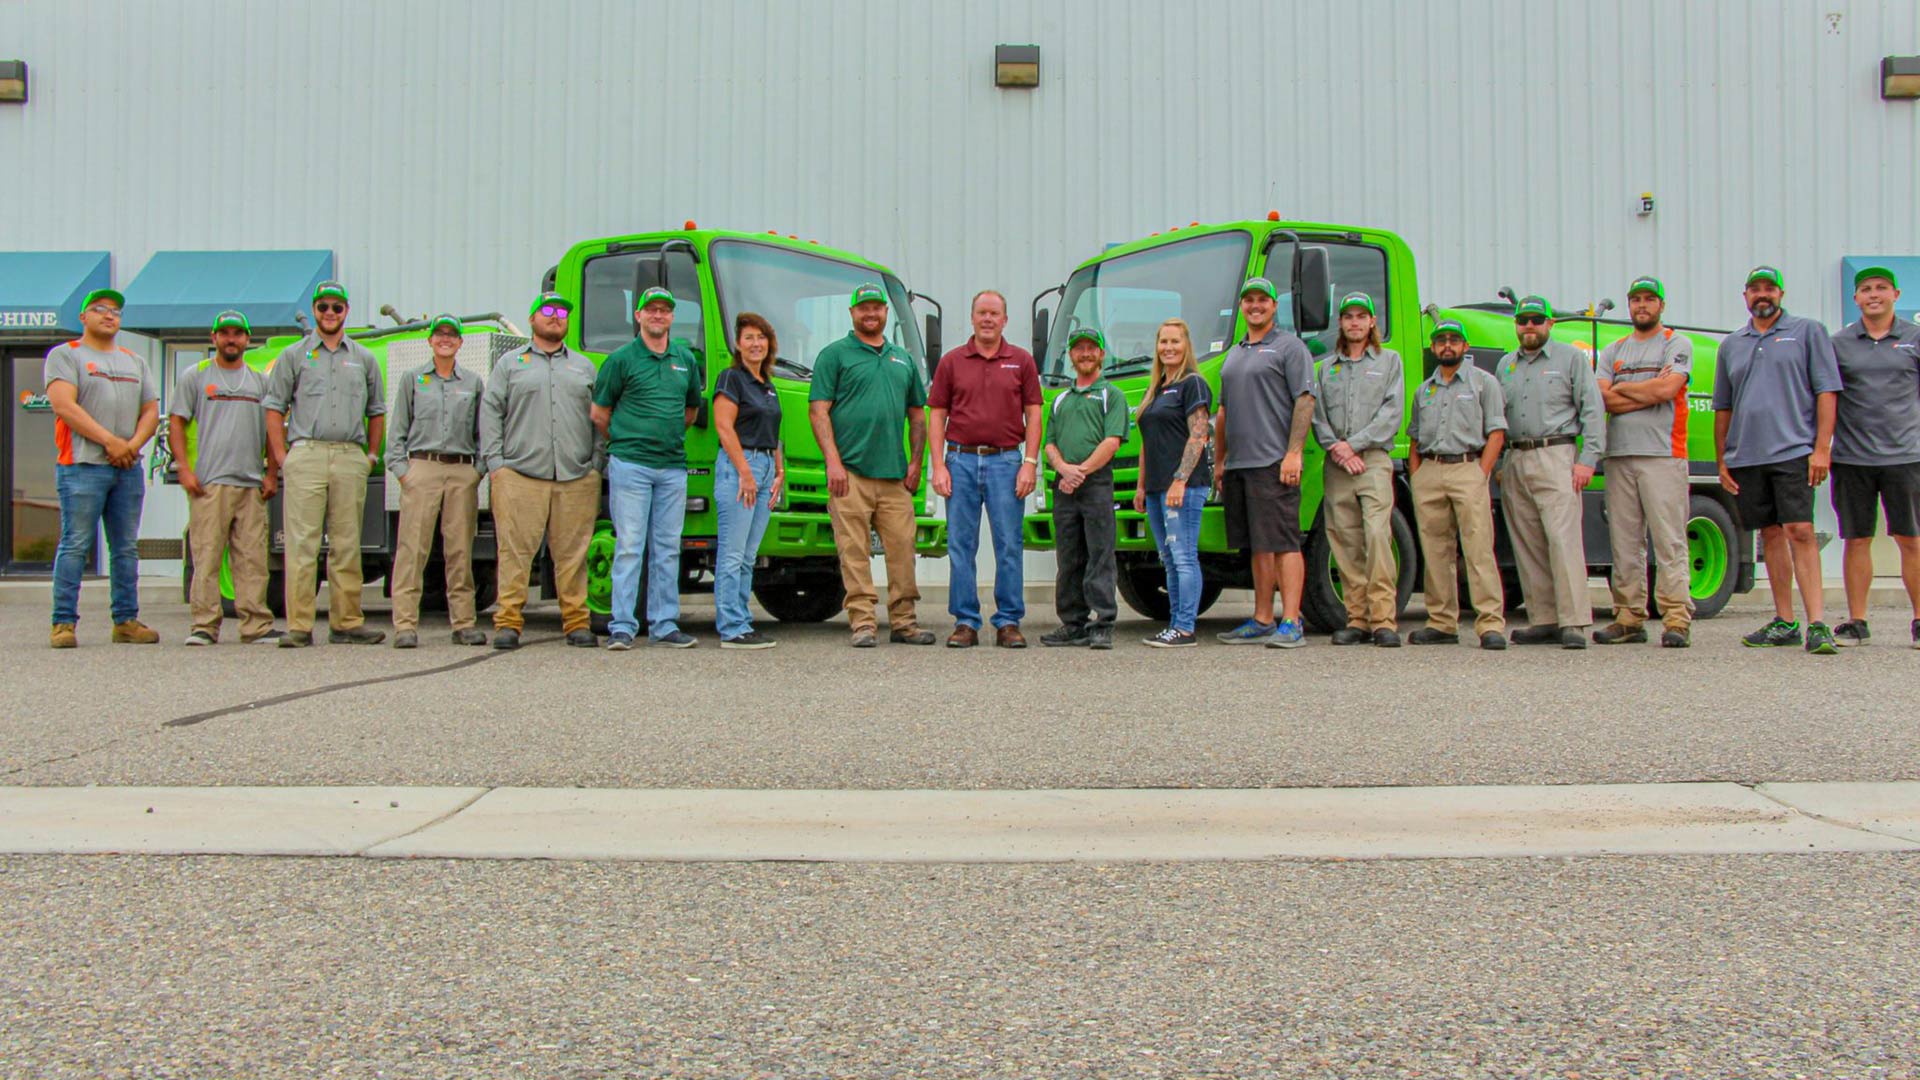 The Mesa Turf Masters team with their work trucks and office in the background near Grand Junction, CO.